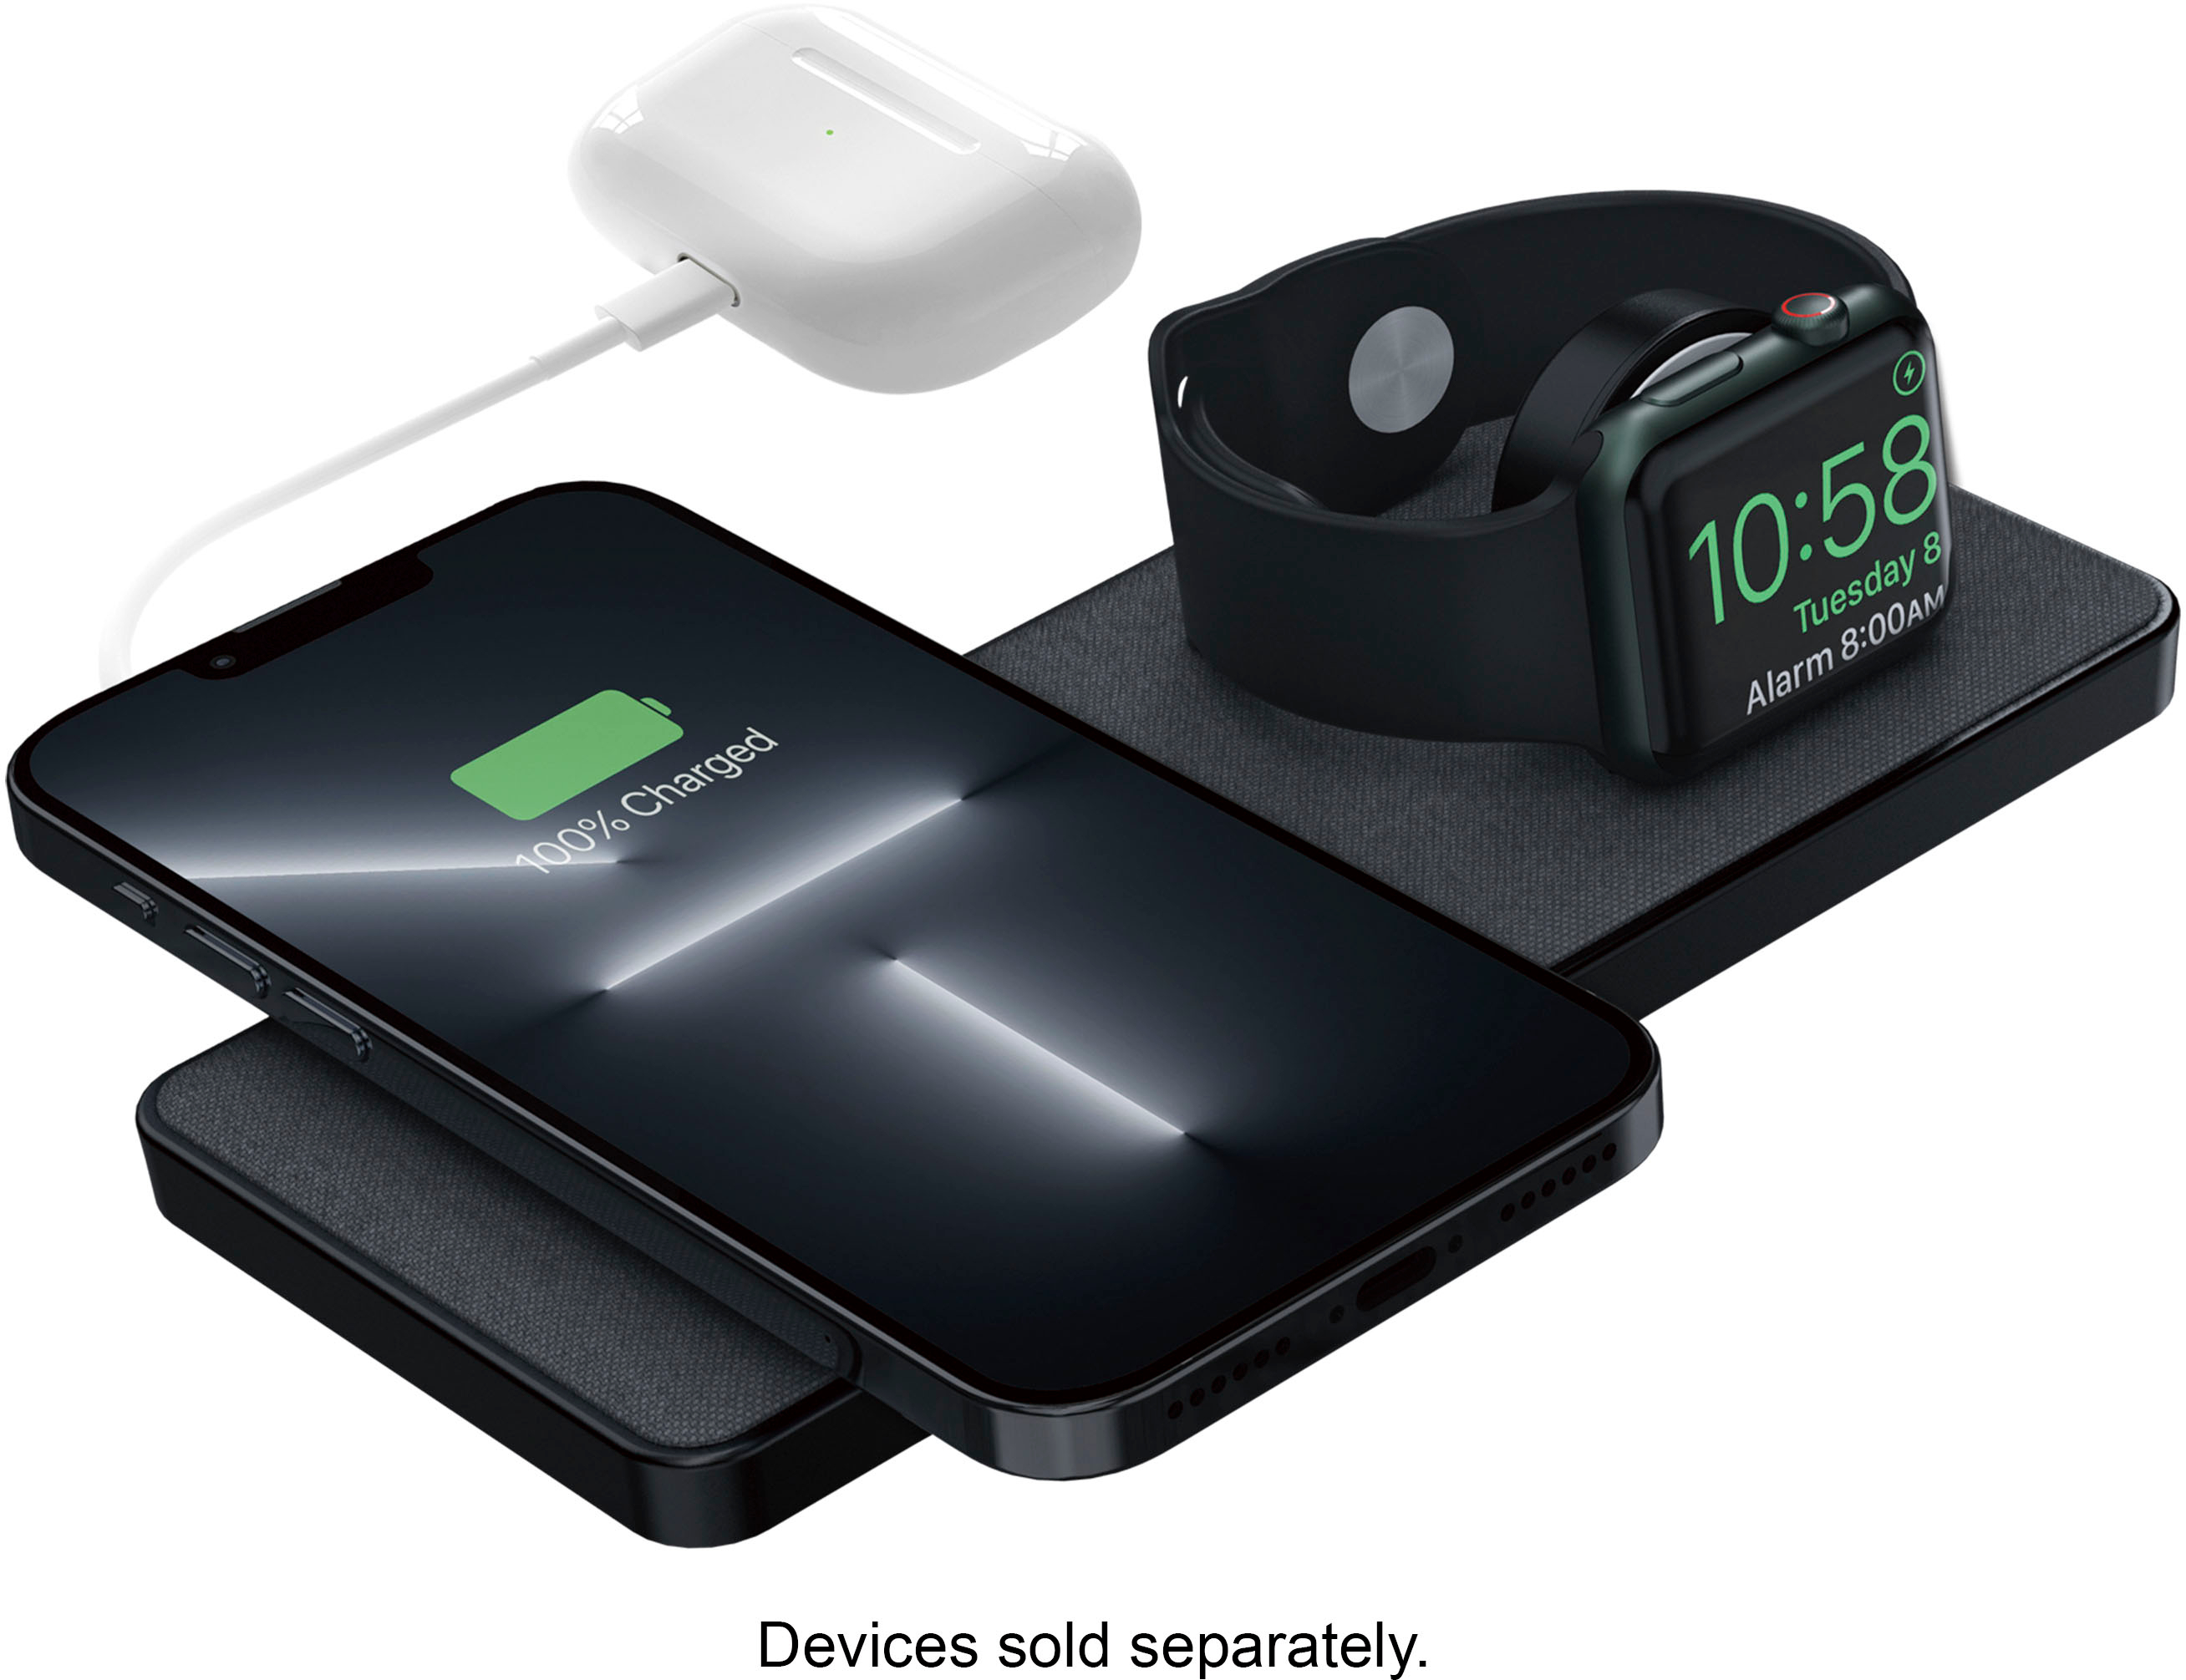 Chargeur magnétique 4 en 1 - Apple Watch iPhone AirPods - Band-Band